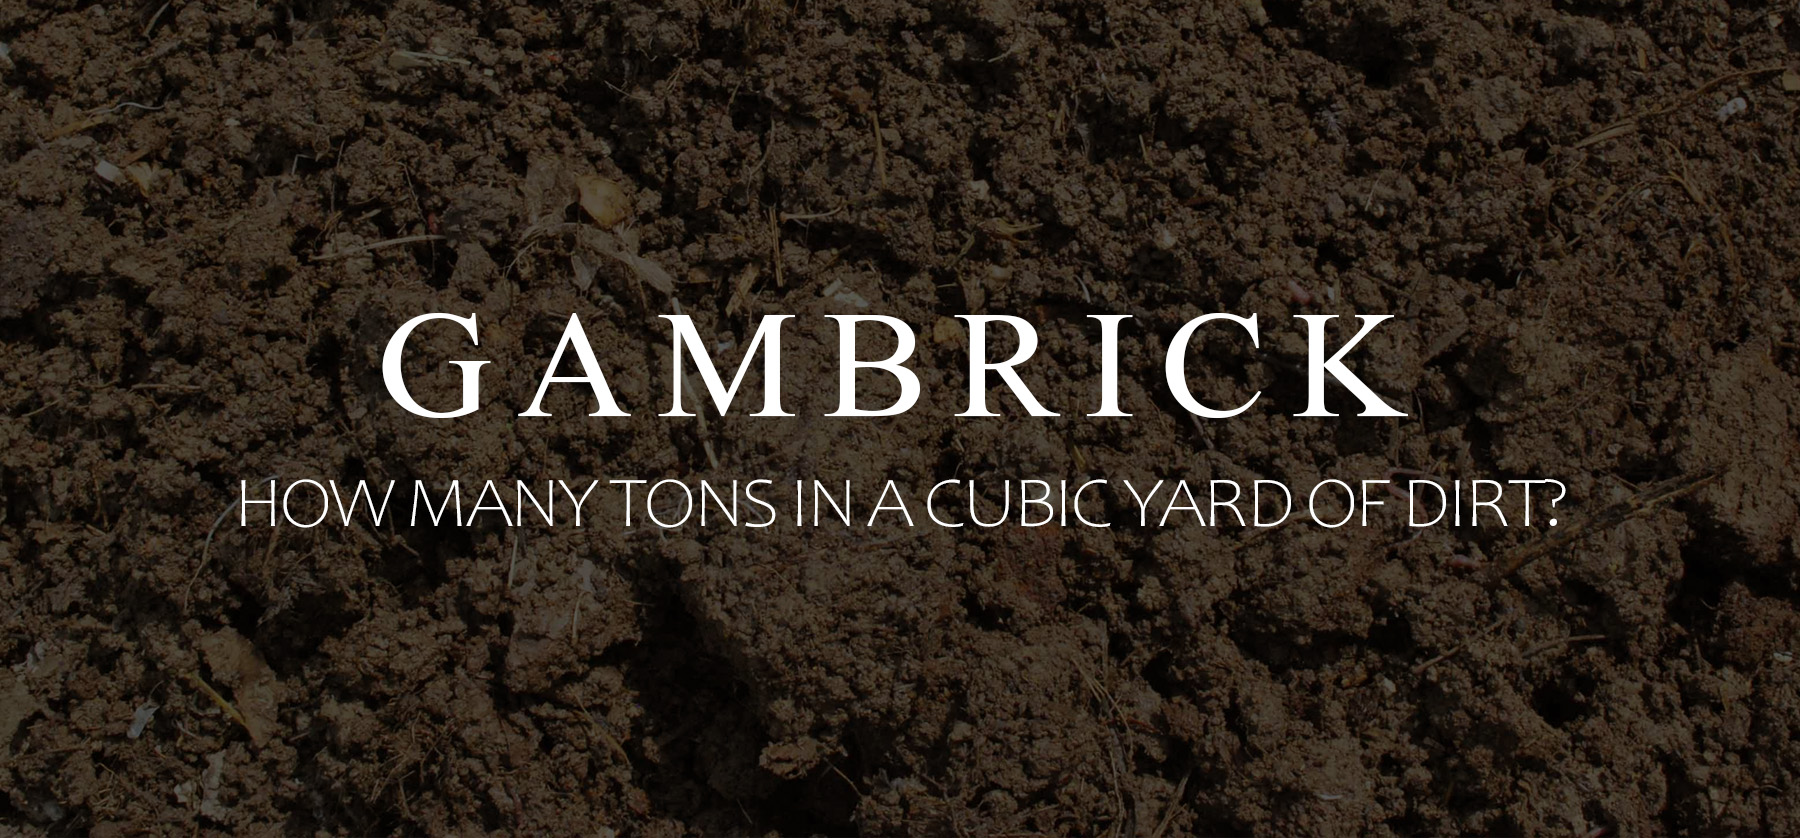 how many tons in a cubic yard of dirt banner